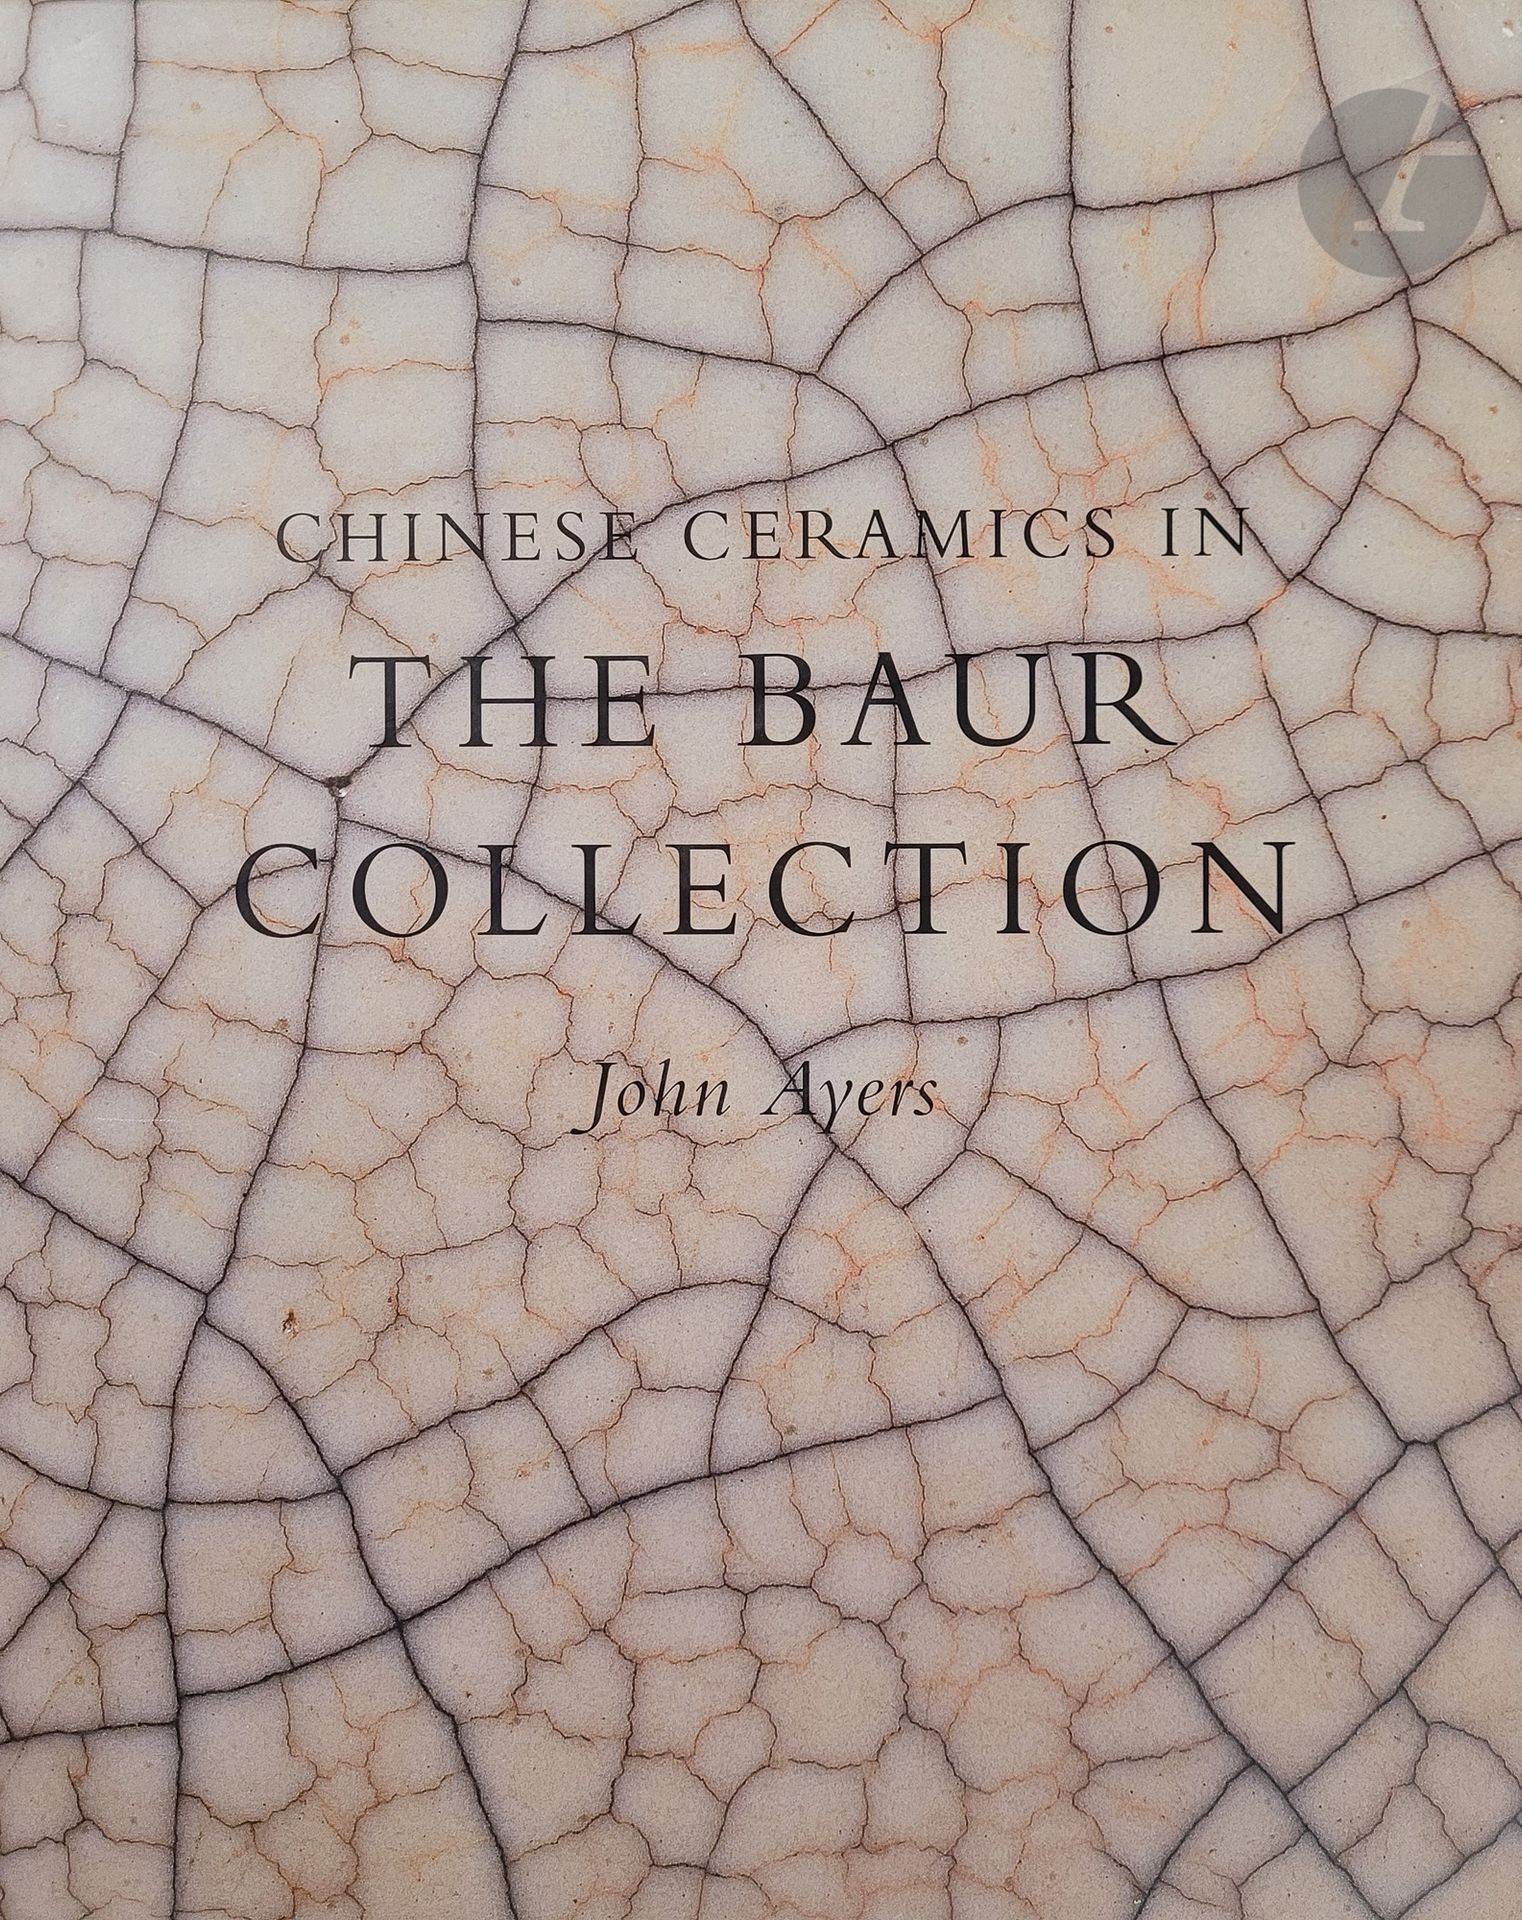 Null CHINA - COLECCIÓN] 
Ayers J., Chinese Ceramics in the Baur Collection, Gine&hellip;